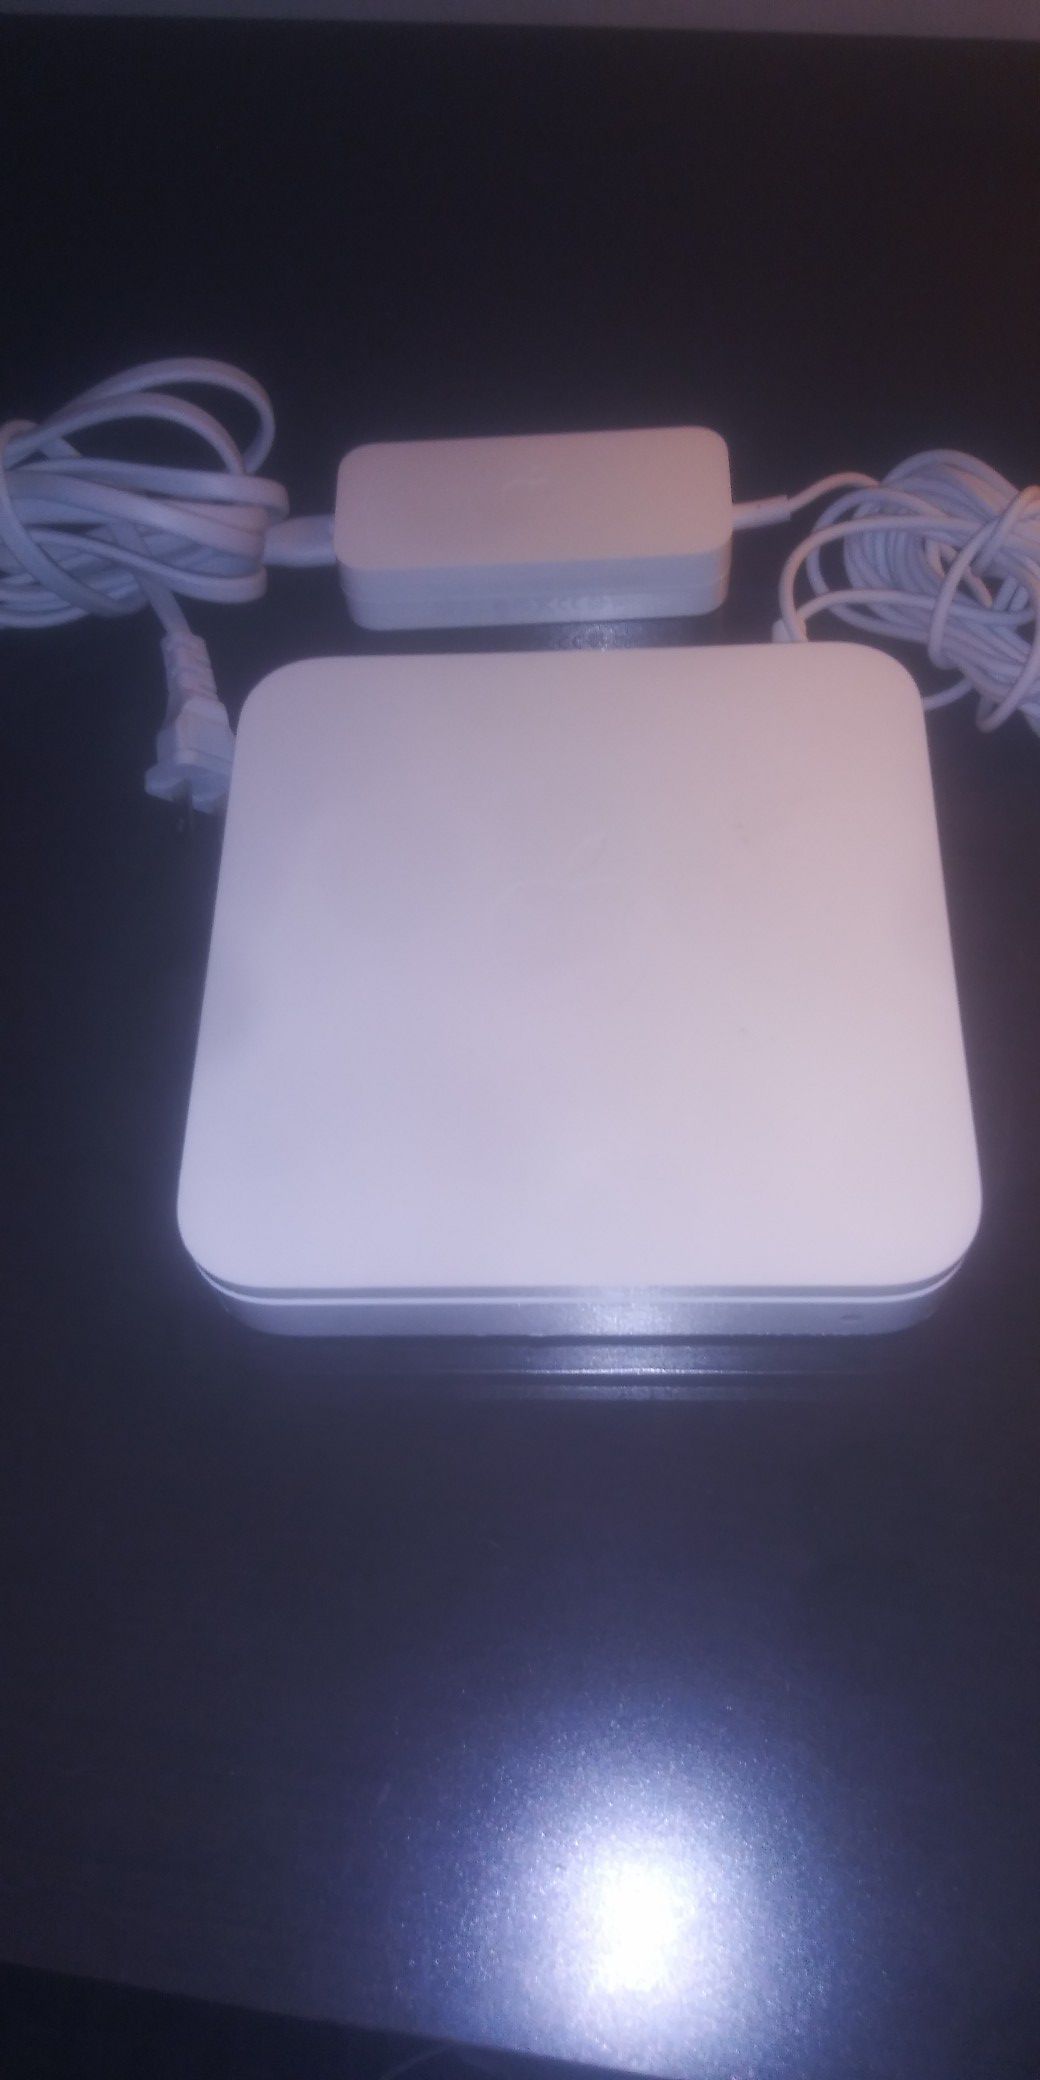 APPLE WIFI ROUTER (Airport extreme base station)